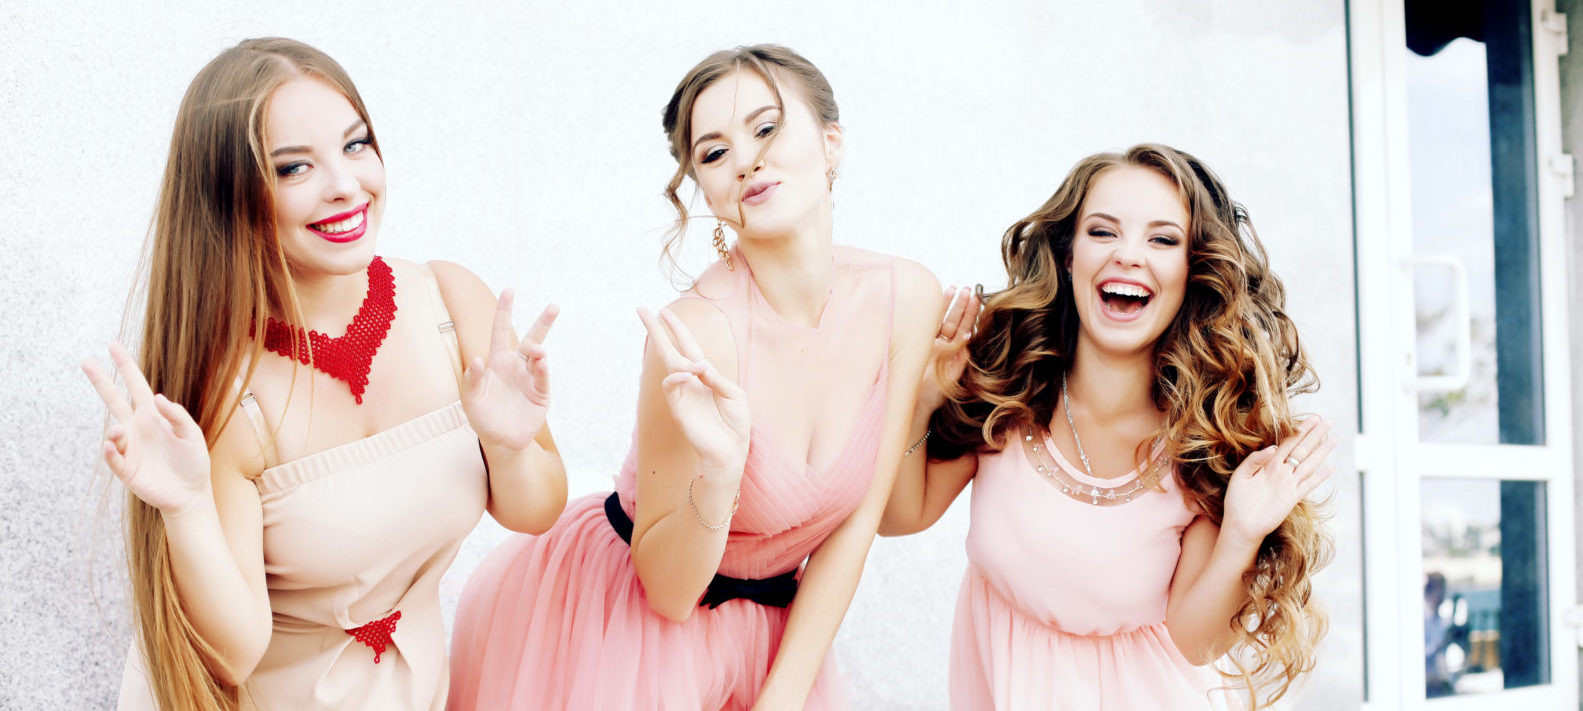 Prom Hairstyles Quiz
 Find Your Perfect Prom Style QUIZ